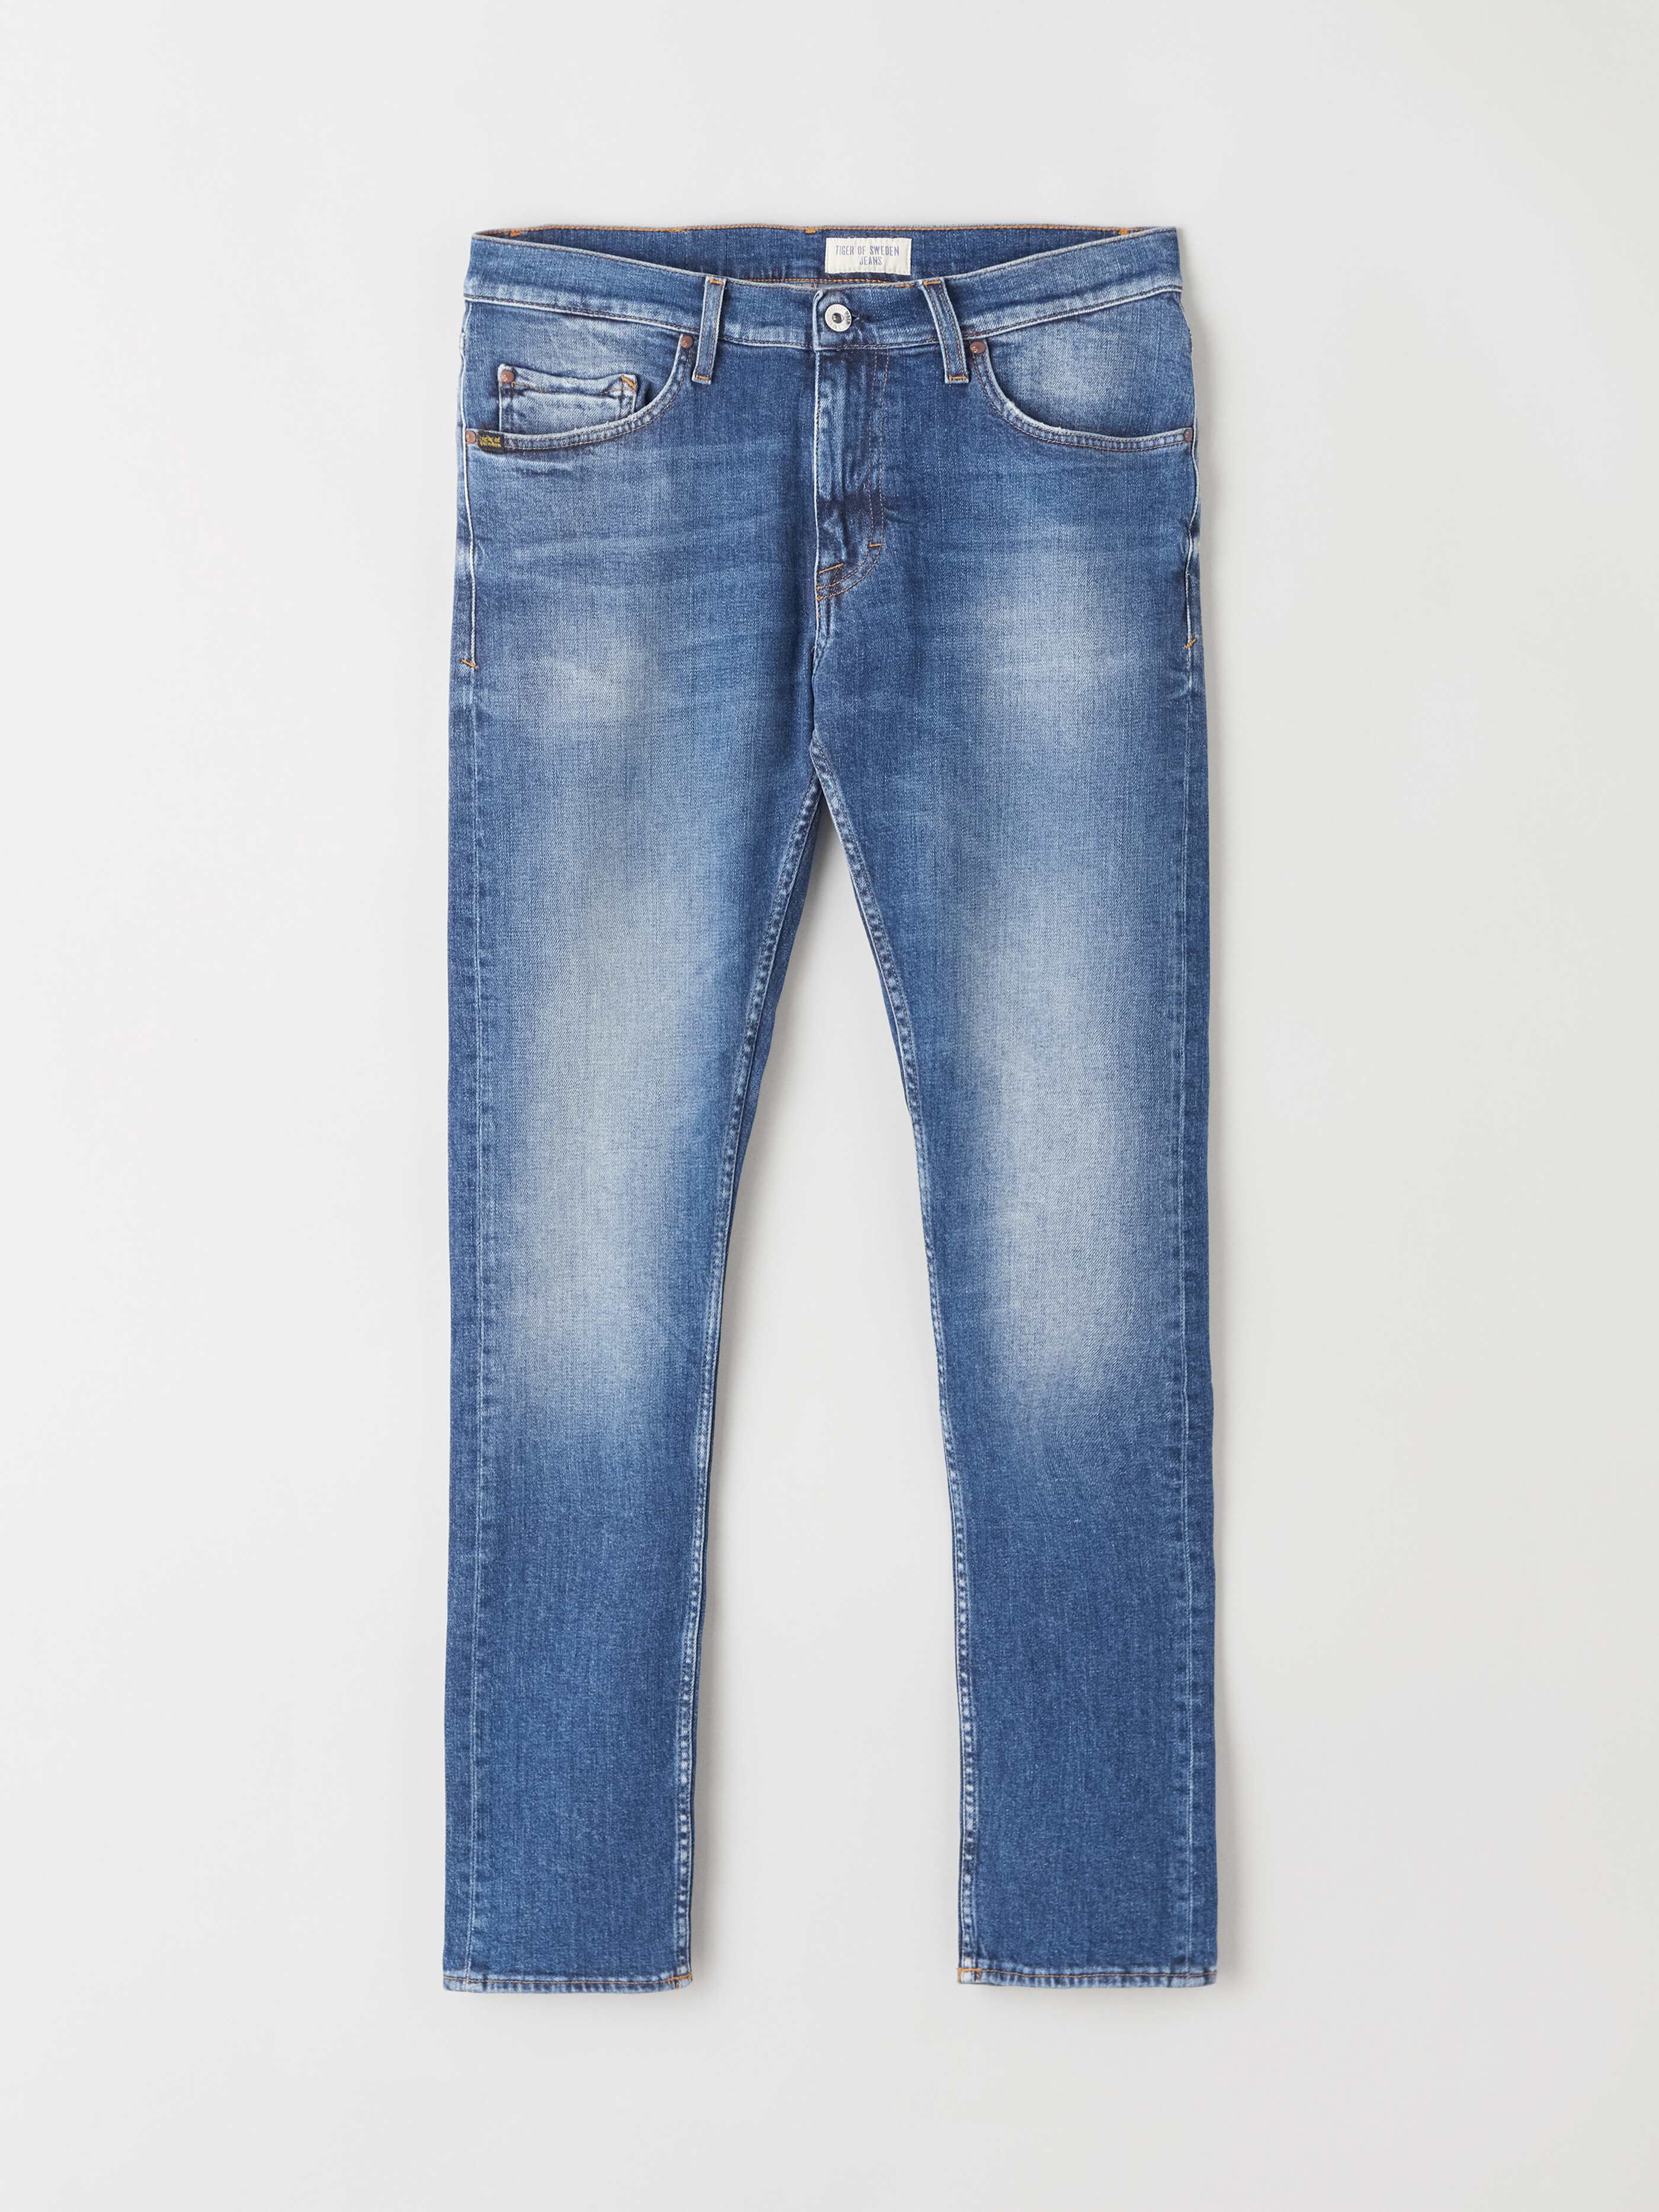 cheapest place to buy jeans online